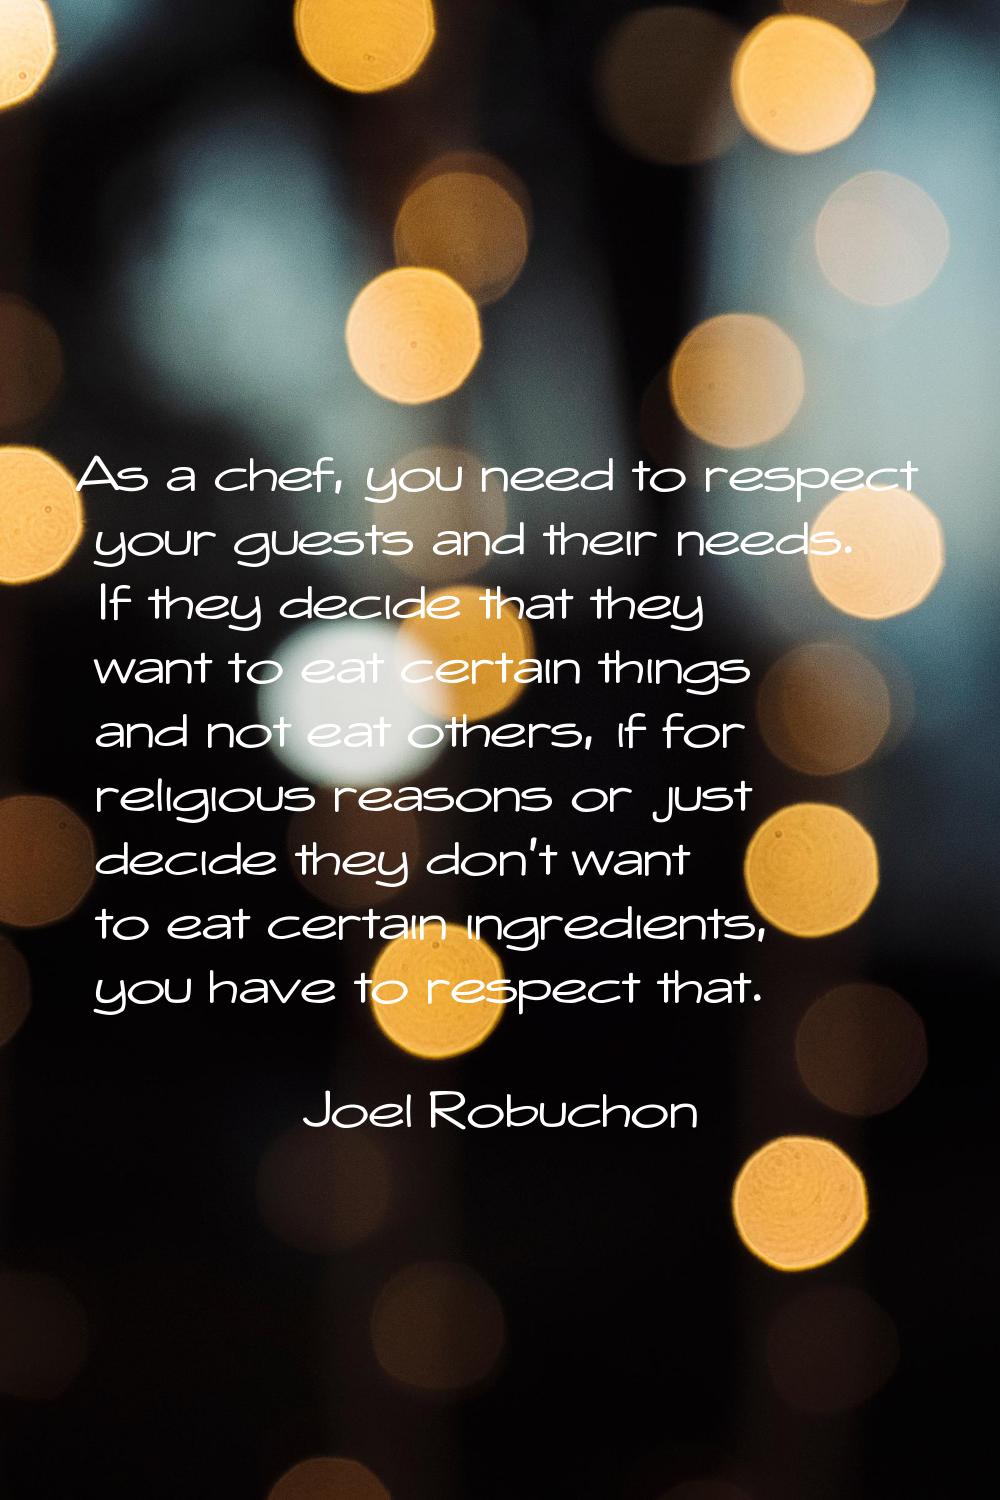 As a chef, you need to respect your guests and their needs. If they decide that they want to eat ce